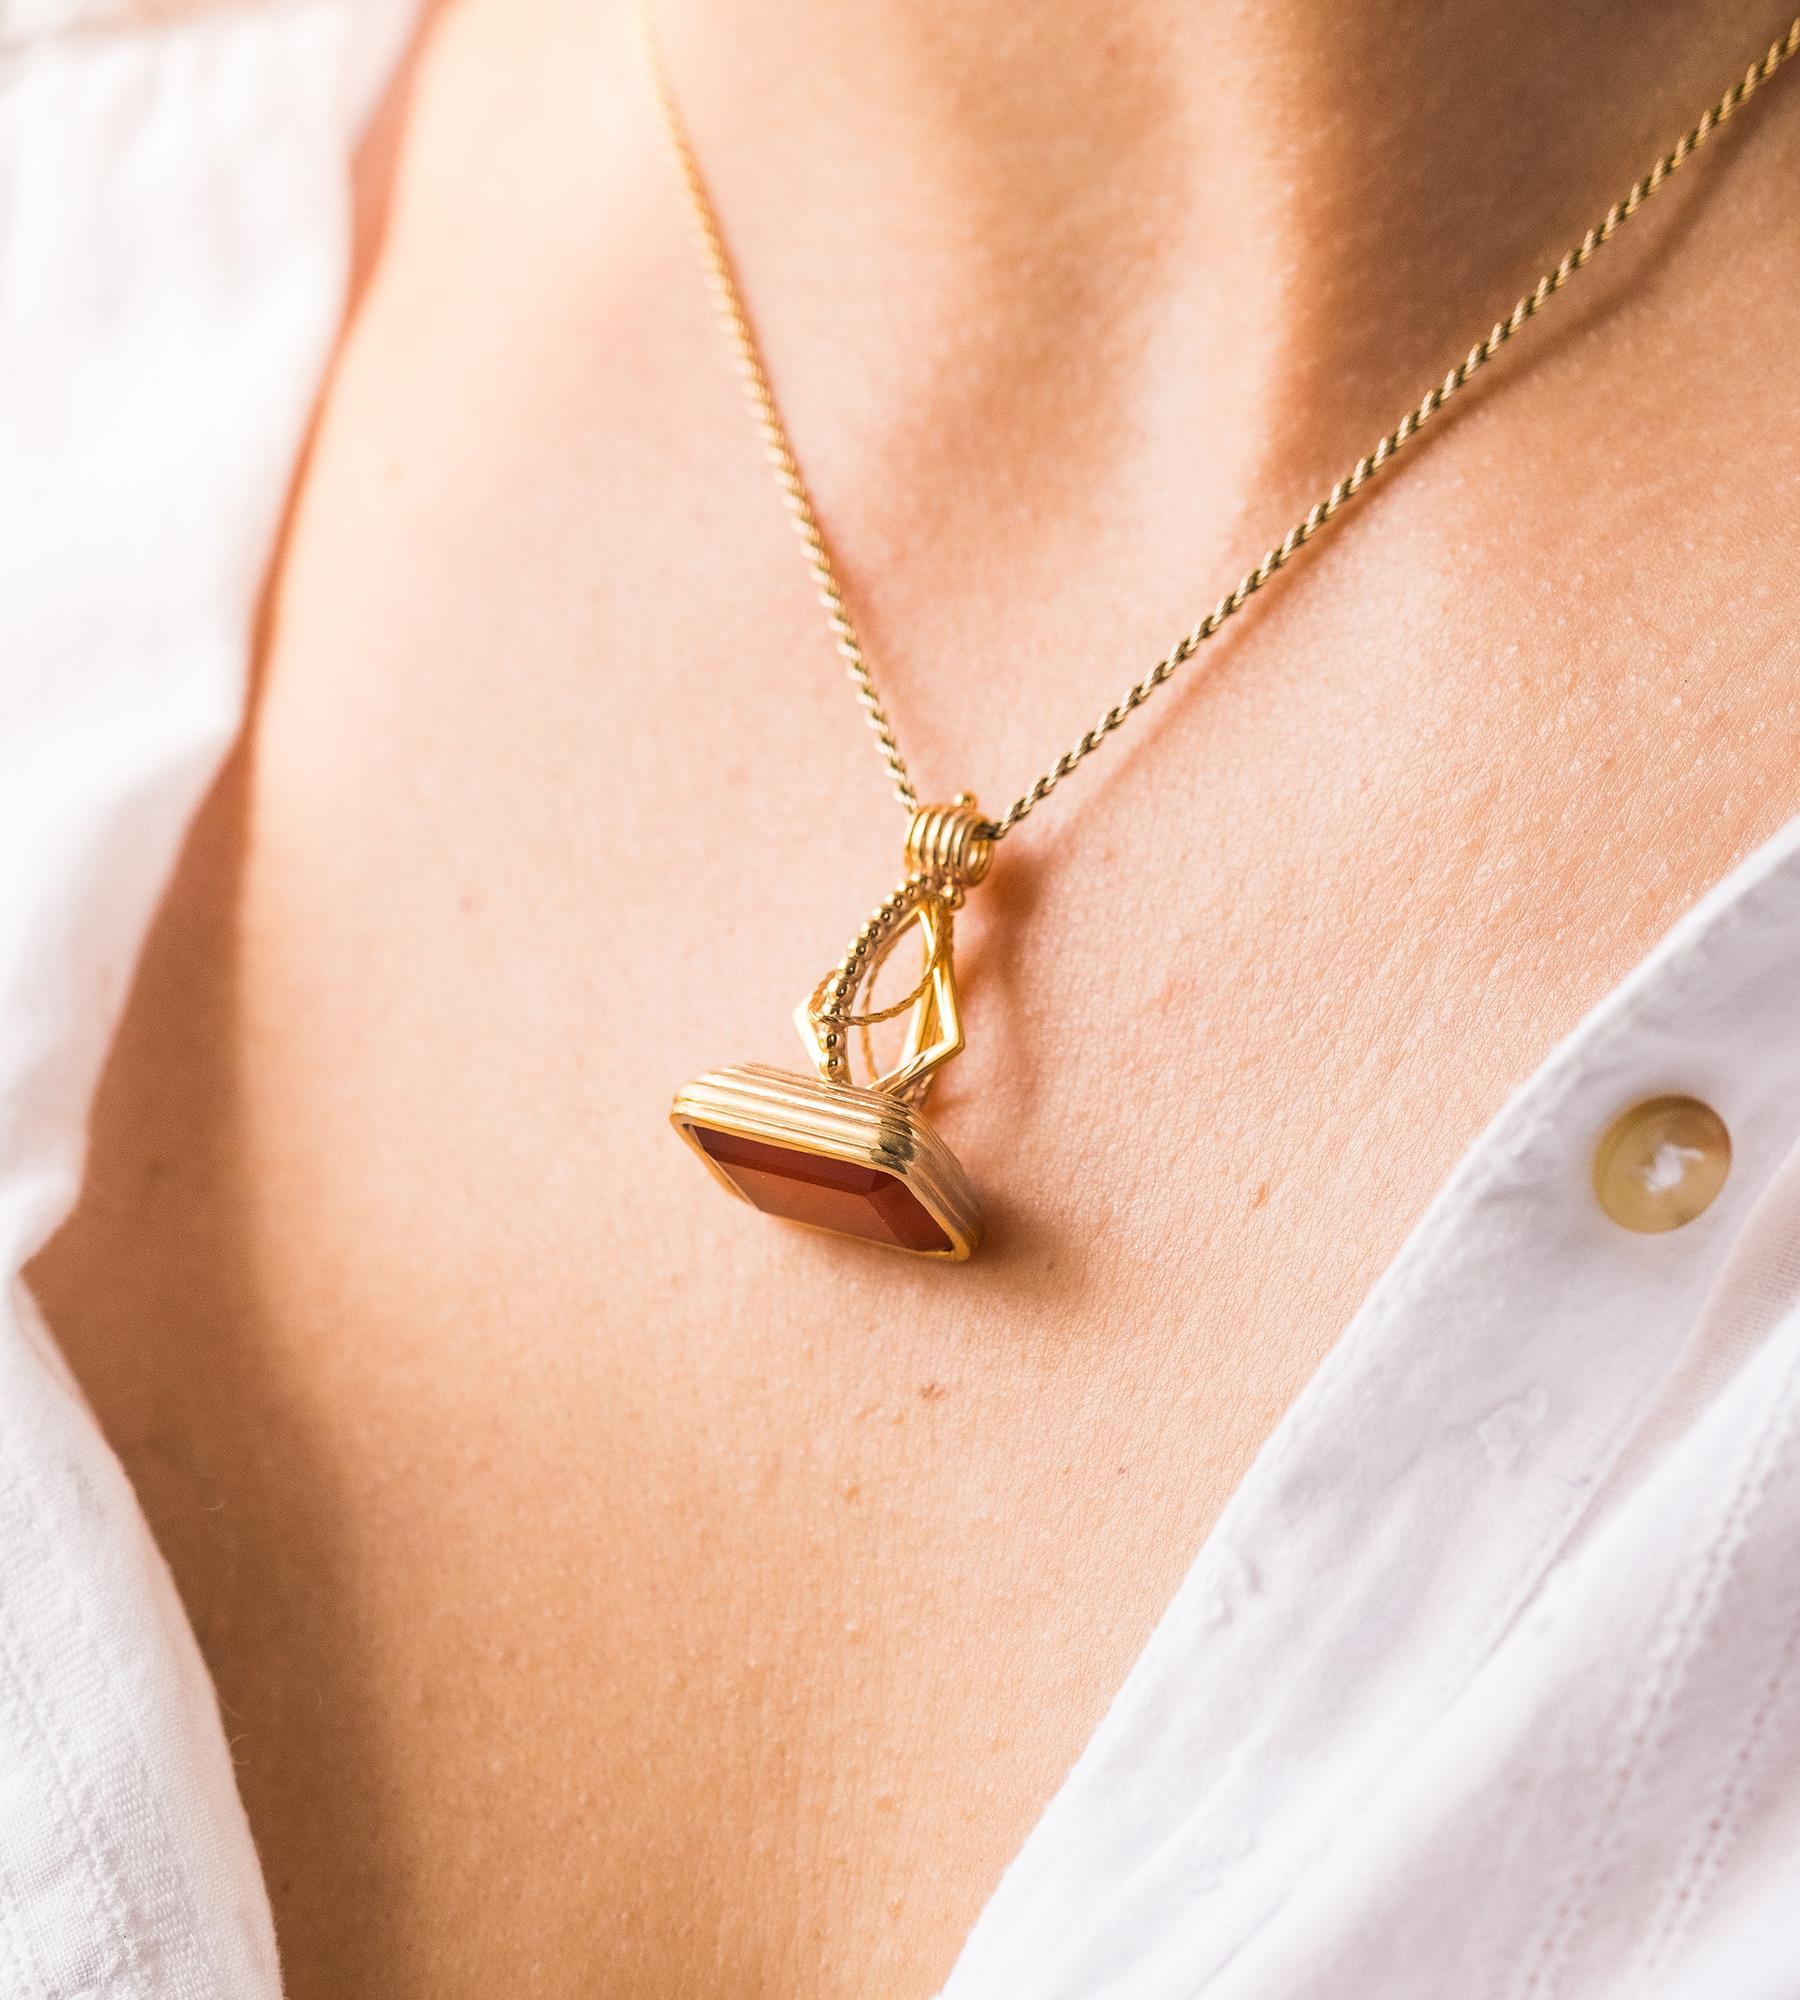 Handmade in 18ct gold, the Fleur Fairfax Gemstone Fob takes it’s design inspiration from an original decorative fob seal circa 1835.

In the Georgian age, fobs were ubiquitous ornamental male accessories; decorative letter seals that adorned a